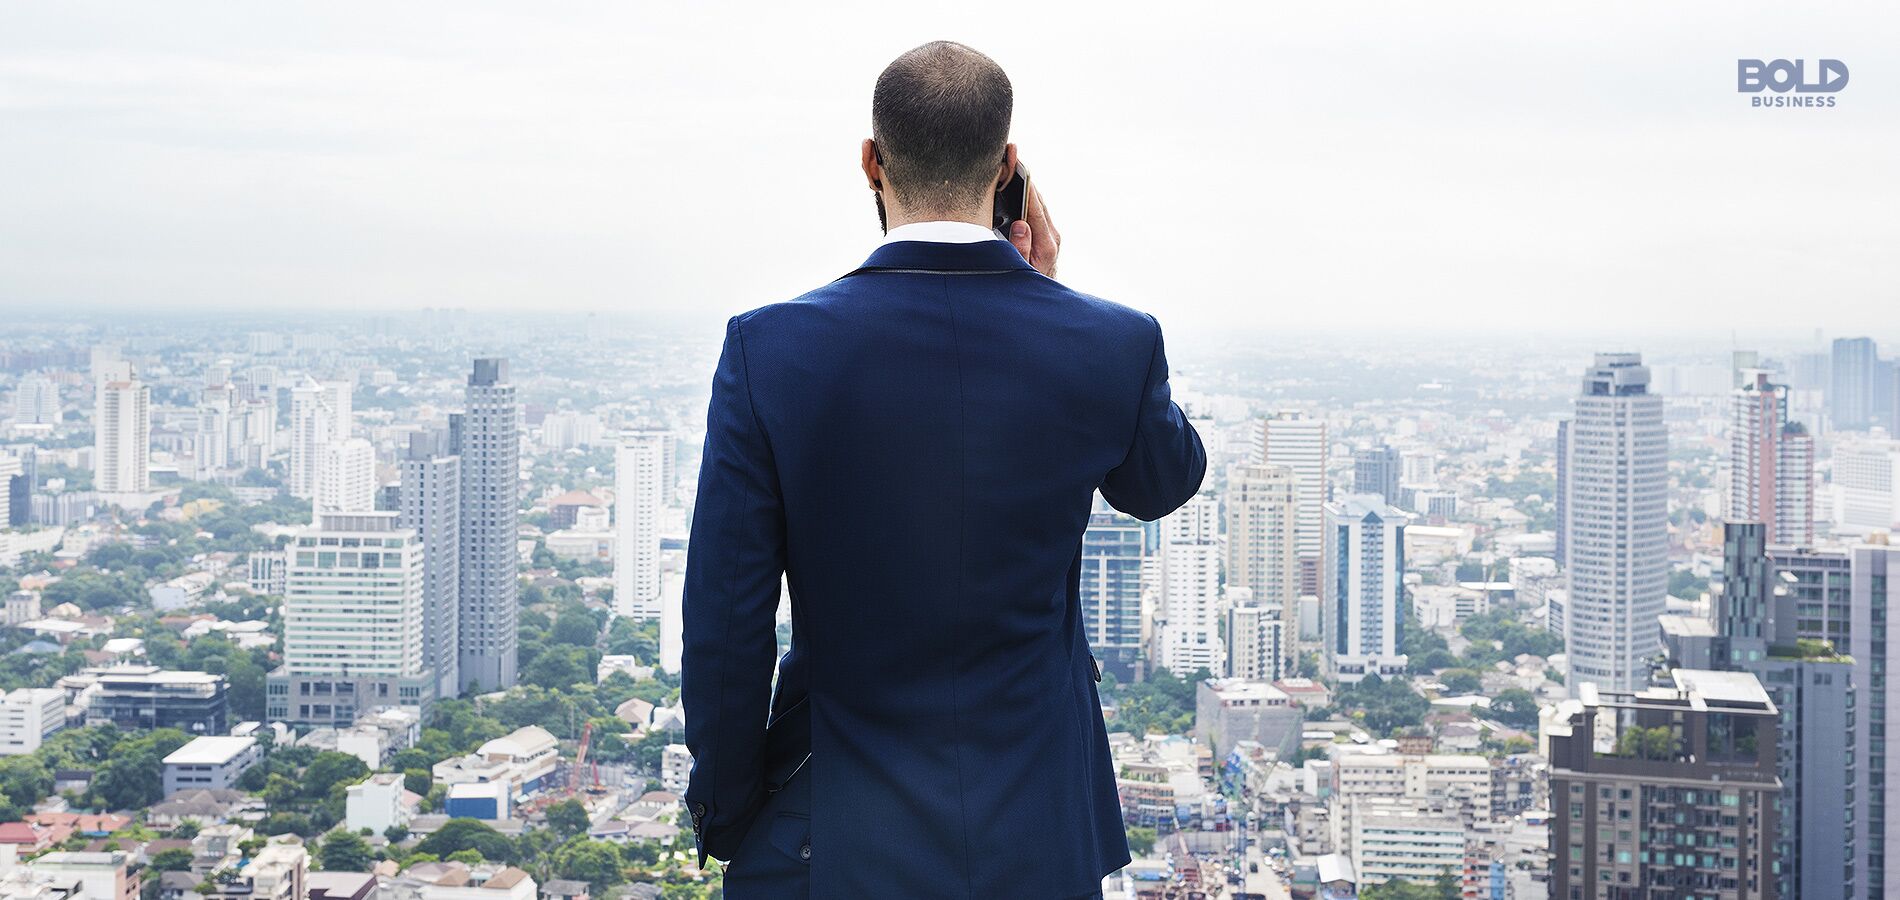 best cities to start a business, man on his back facing a cityscape holding a phone to his ear